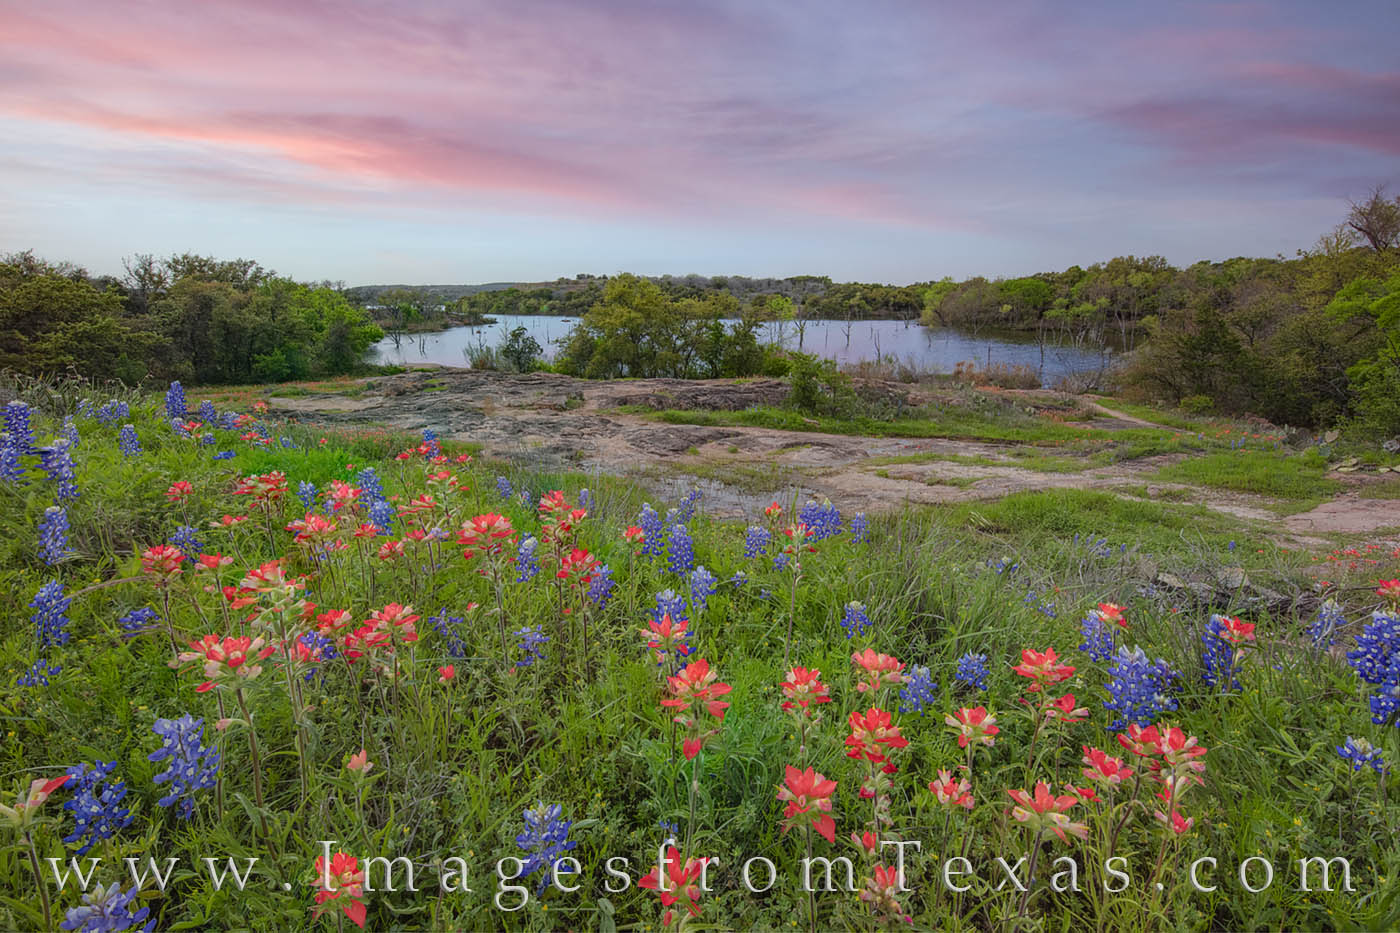 From a small overlook at Inks Lake State Park, bluebonnets and Indian paintbrush make for a nice foreground as the sunset adds...